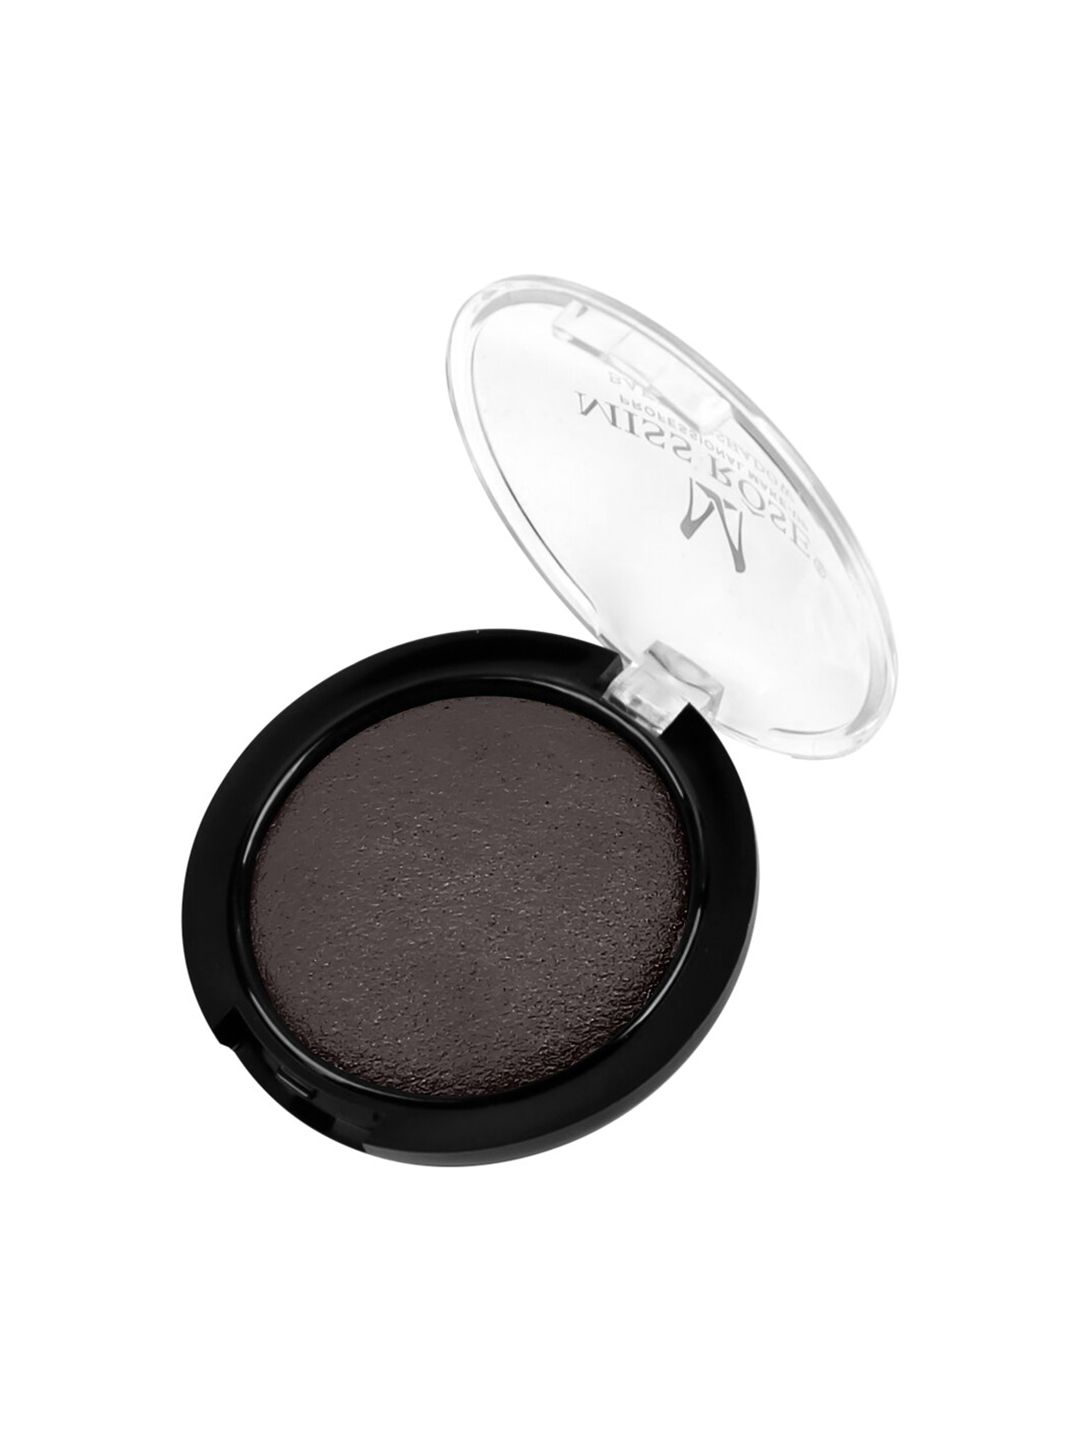 MISS ROSE Black Monochrome Baked Eyeshadow 7001-073M 24 Price in India